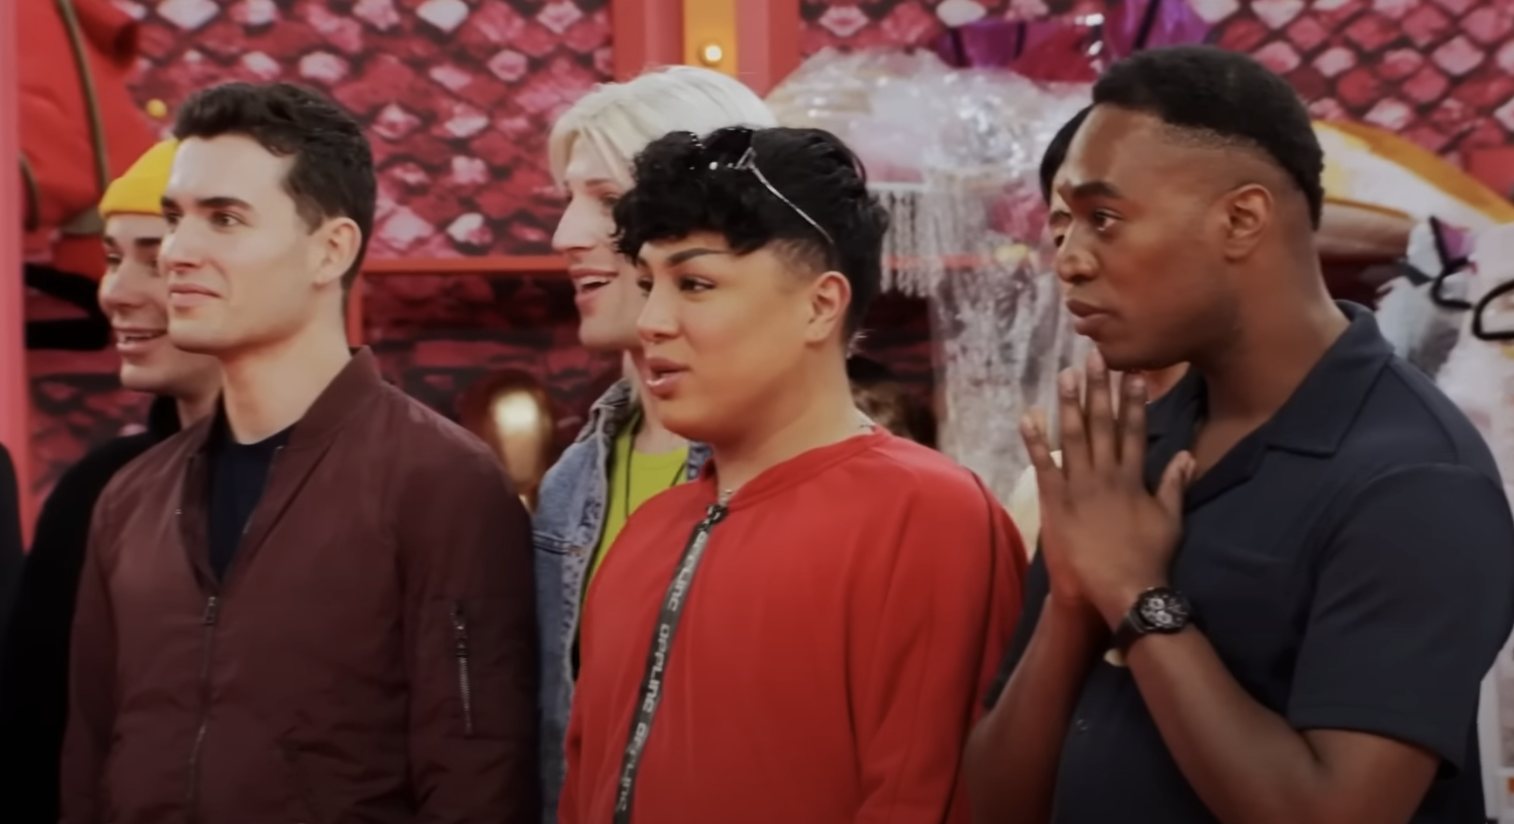 'RuPaul's Drag Race' Exclusive Preview: The Queens Are Reeling From An Emotional Elimination Ahead Of The Girl Group Challenge